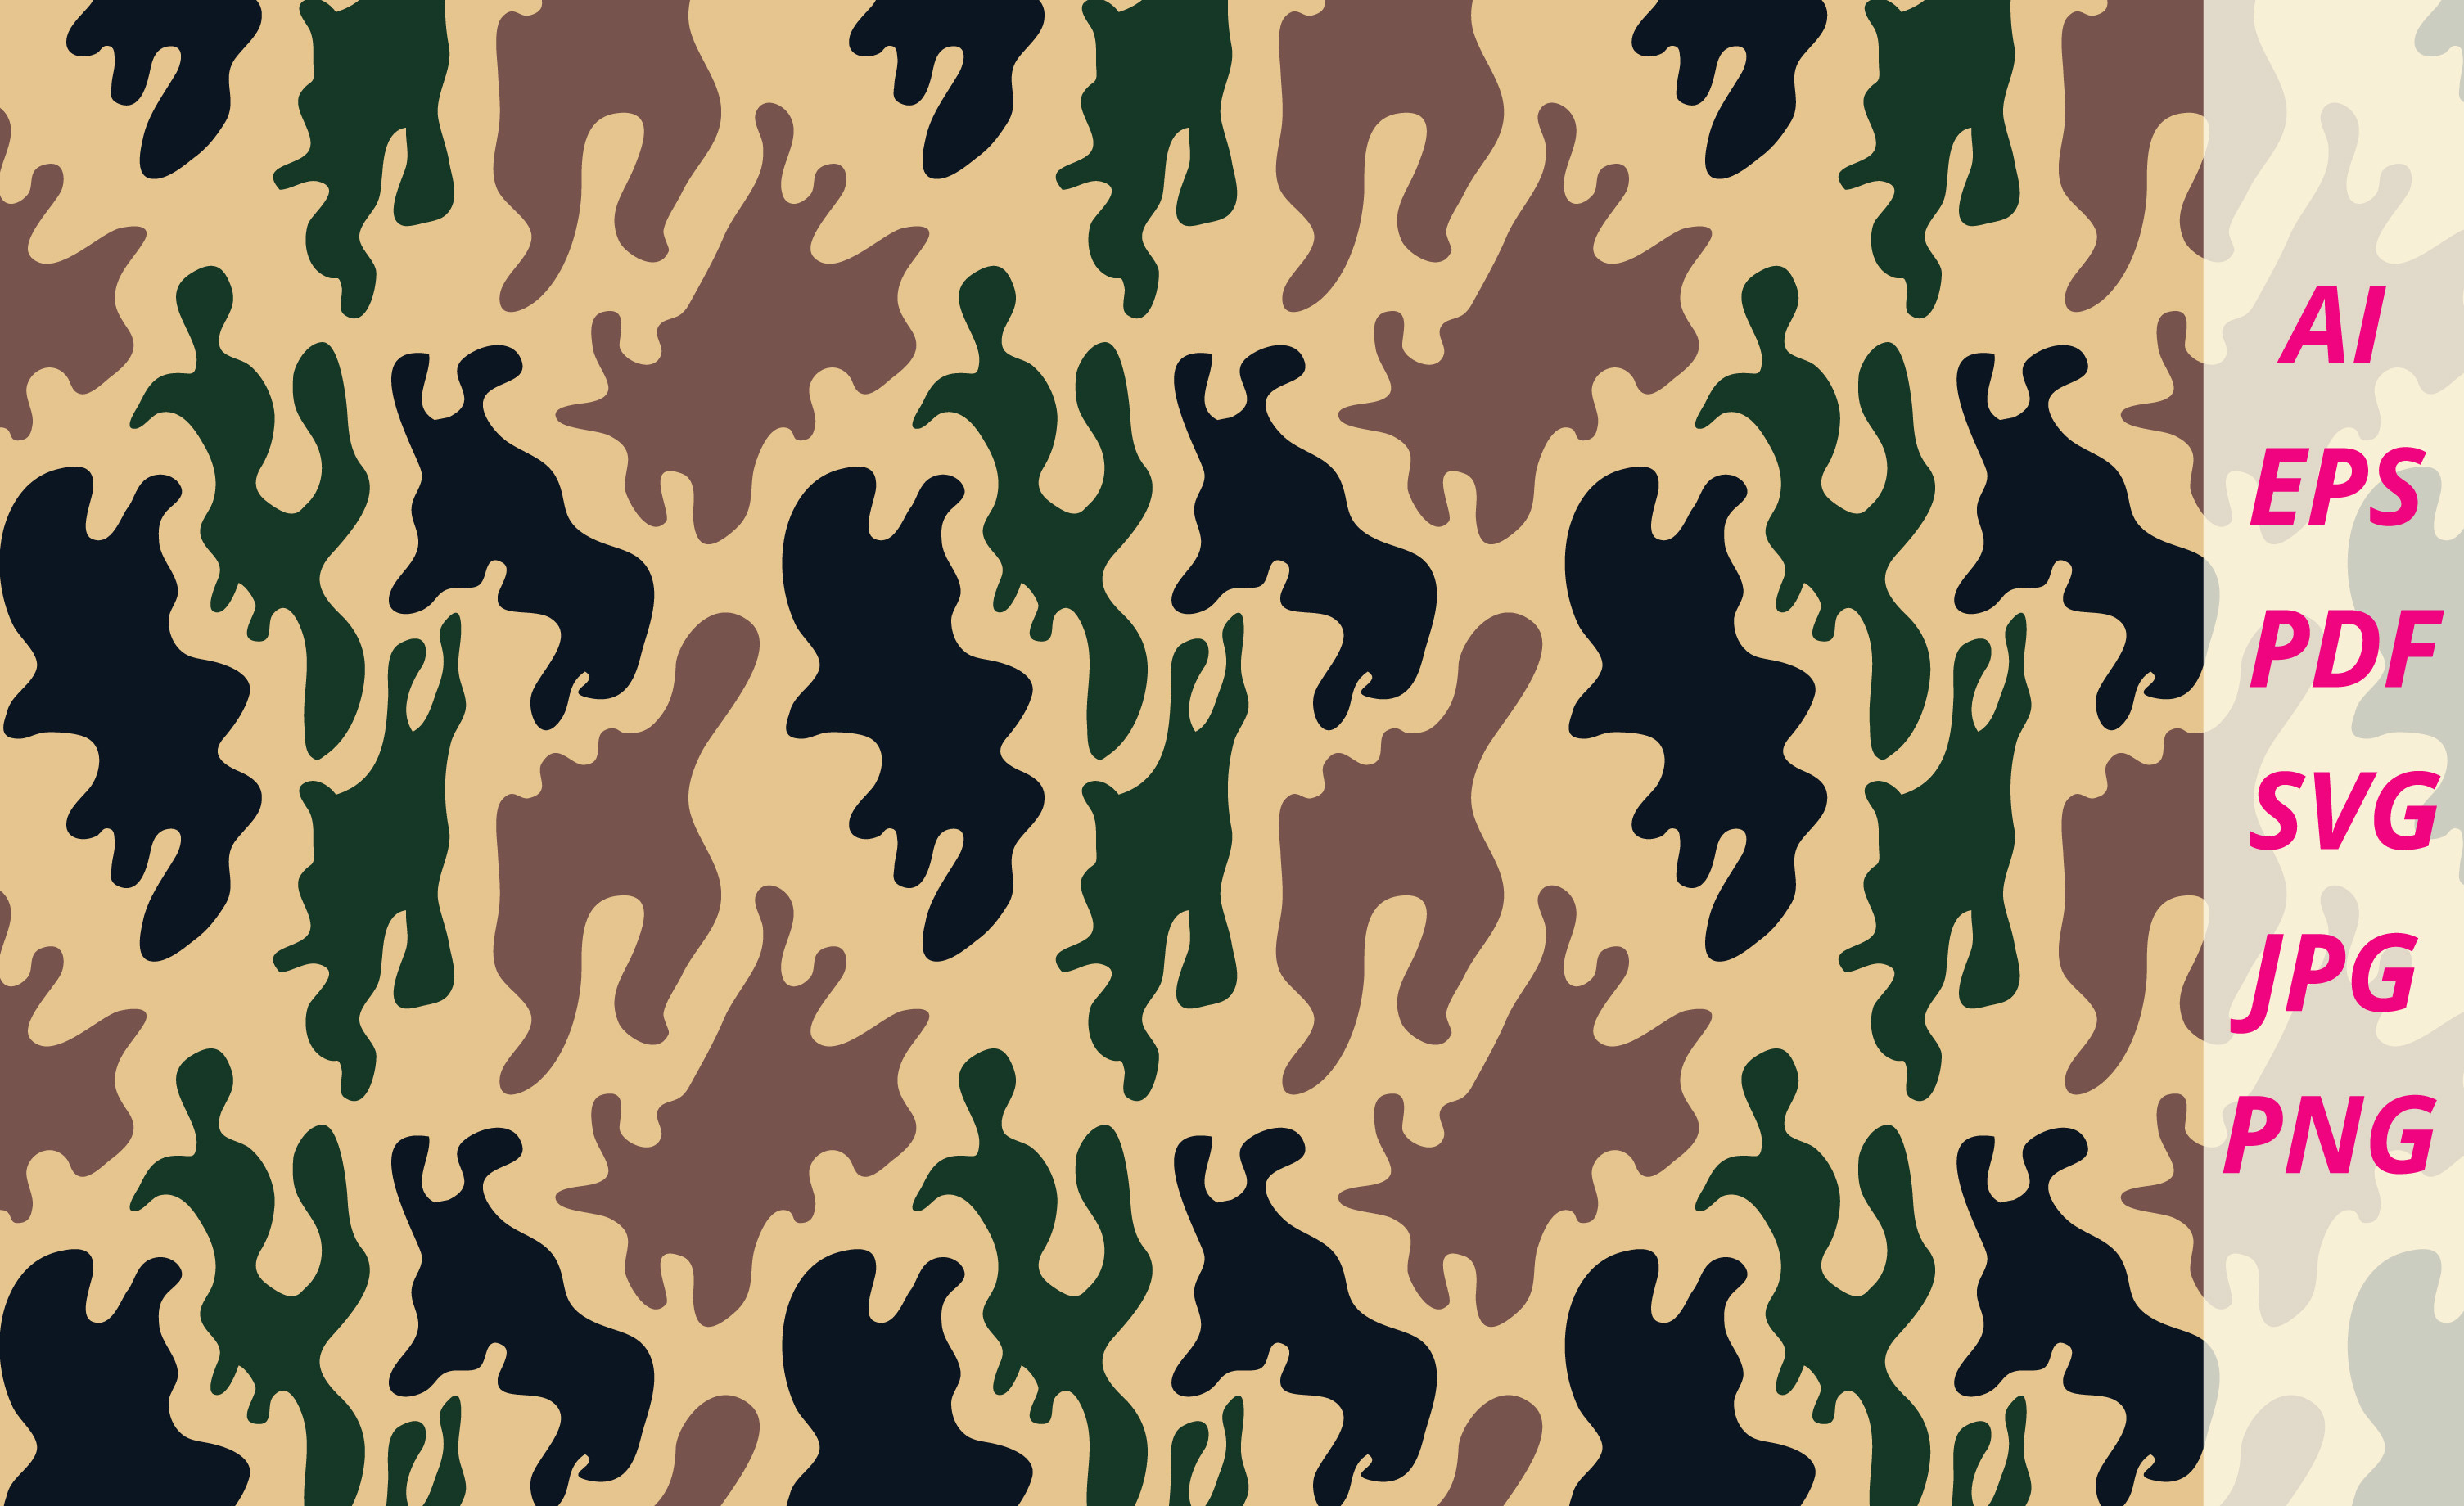 Seamless Camouflage with Leaves - Design Cuts